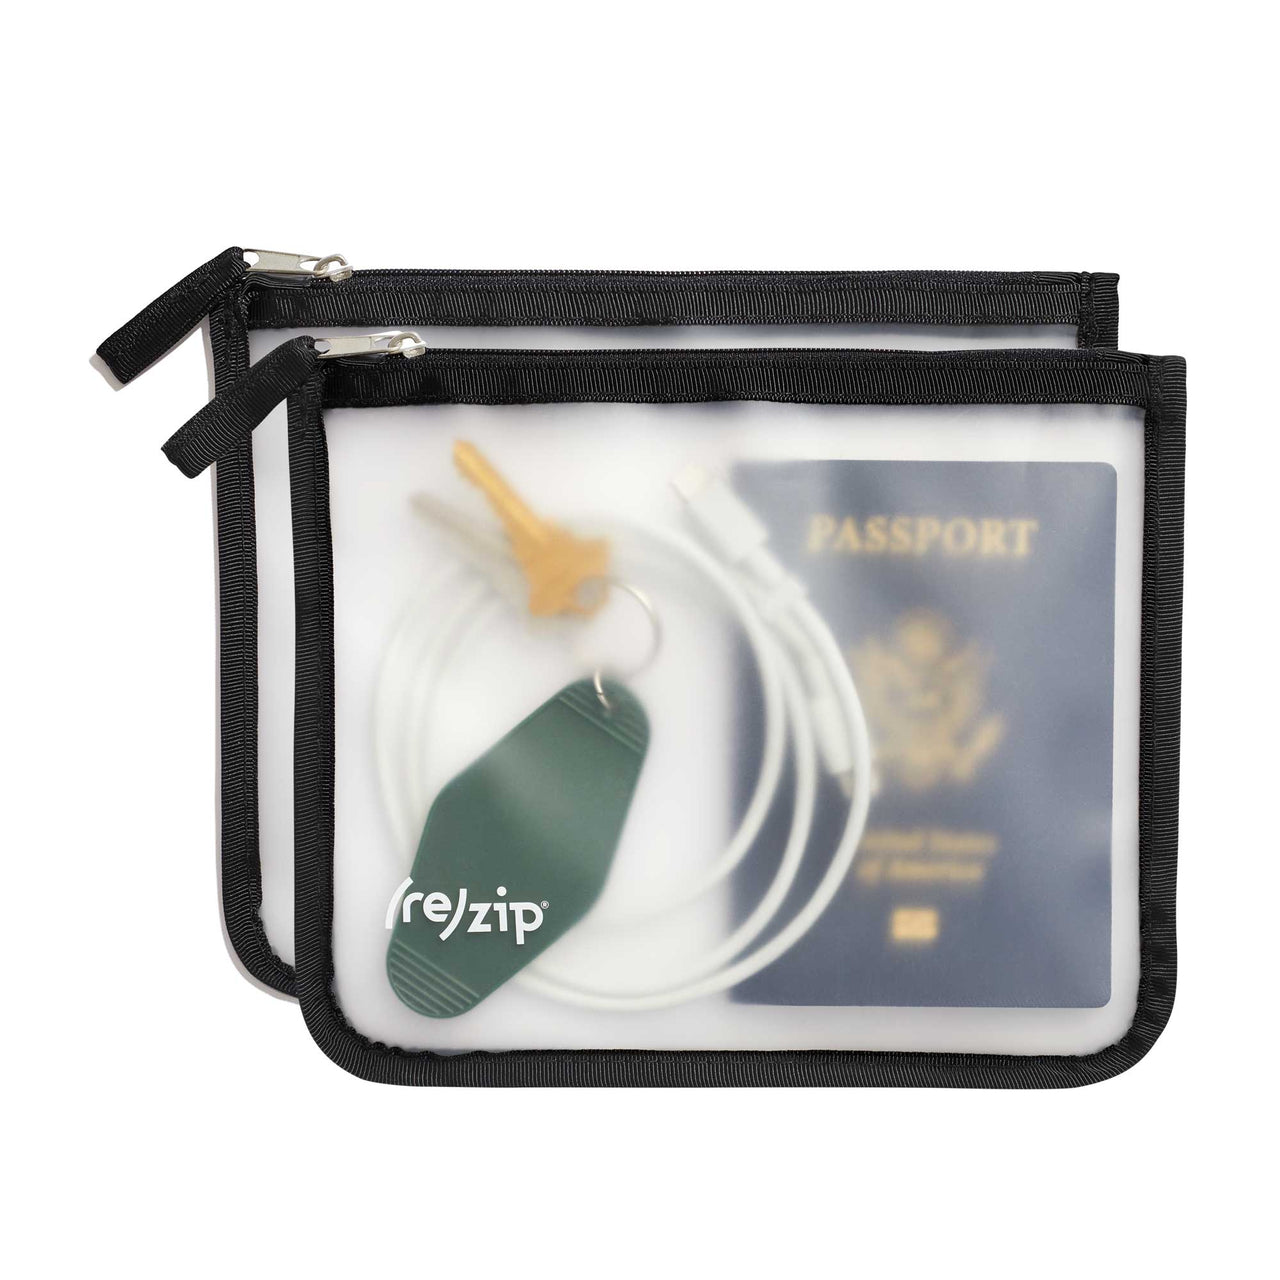 rezip zippered medium bag great for travel and on the go